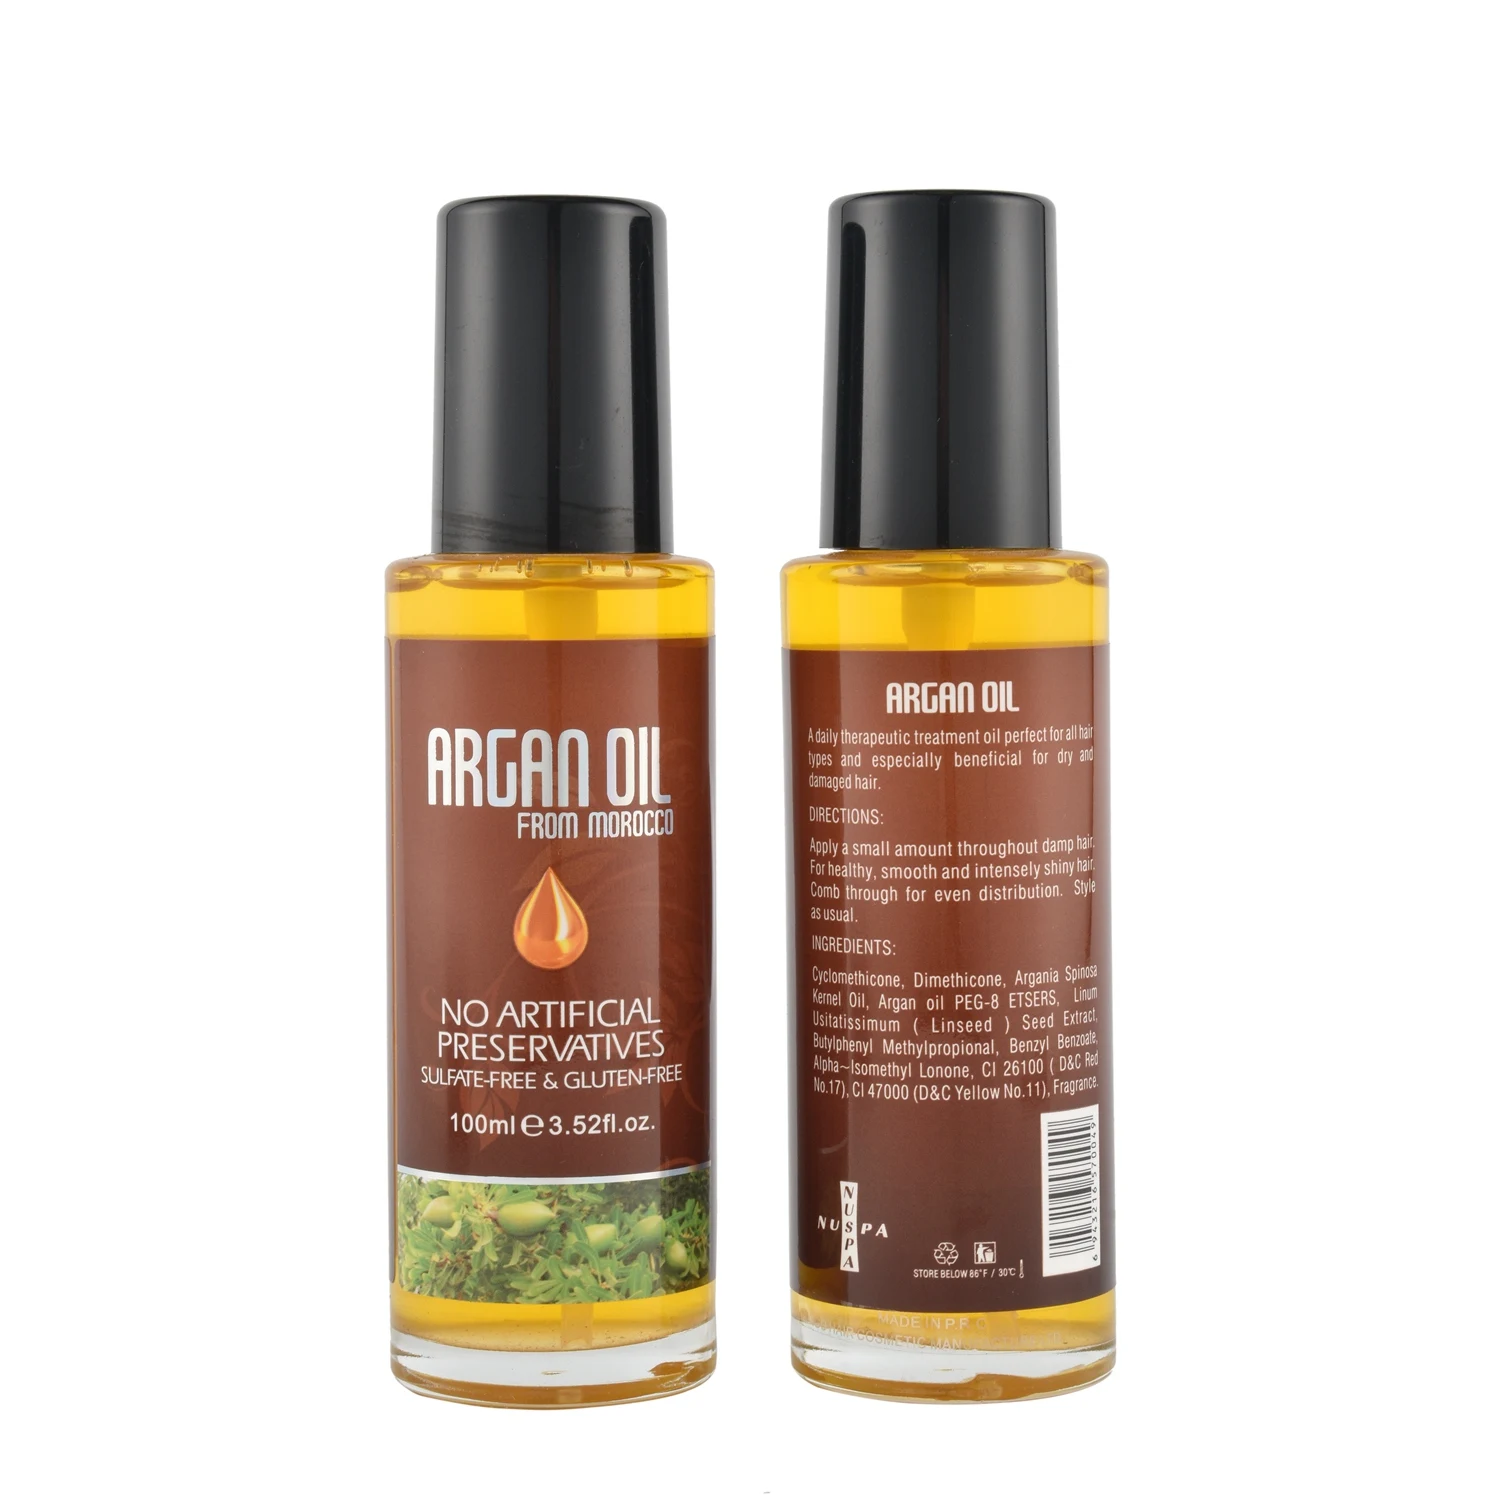 NUSPA Hot Seller Private Label Argan Oil Defining Styling Cream with Fiber  African Organic Curl Styling Products